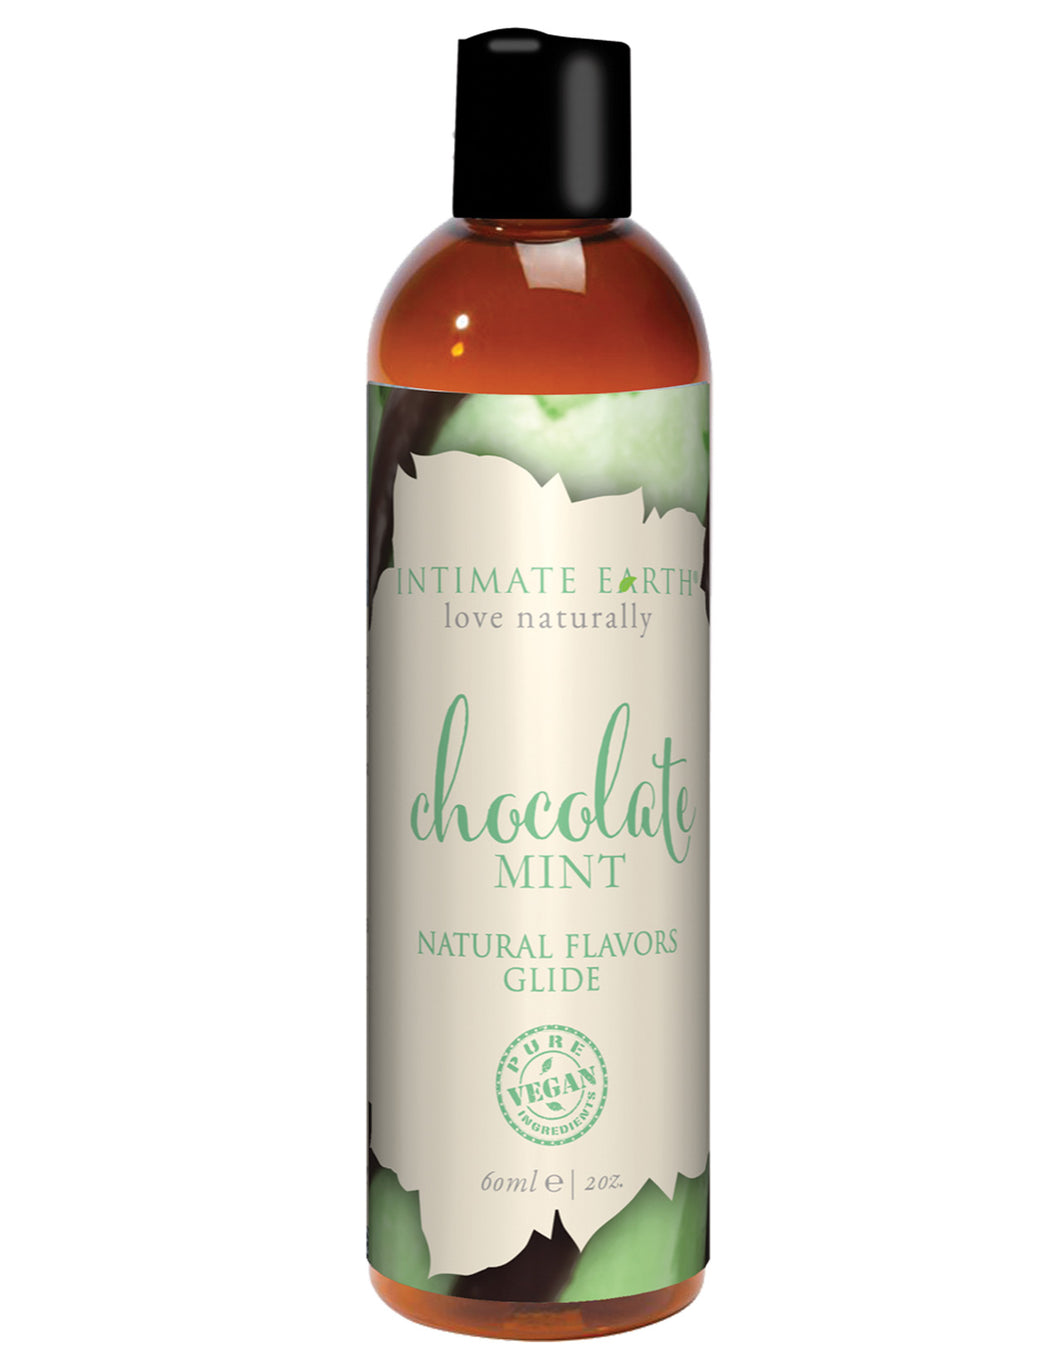 Intimate Earth Natural Flavors Glide - 60 Ml Chocolate Mint